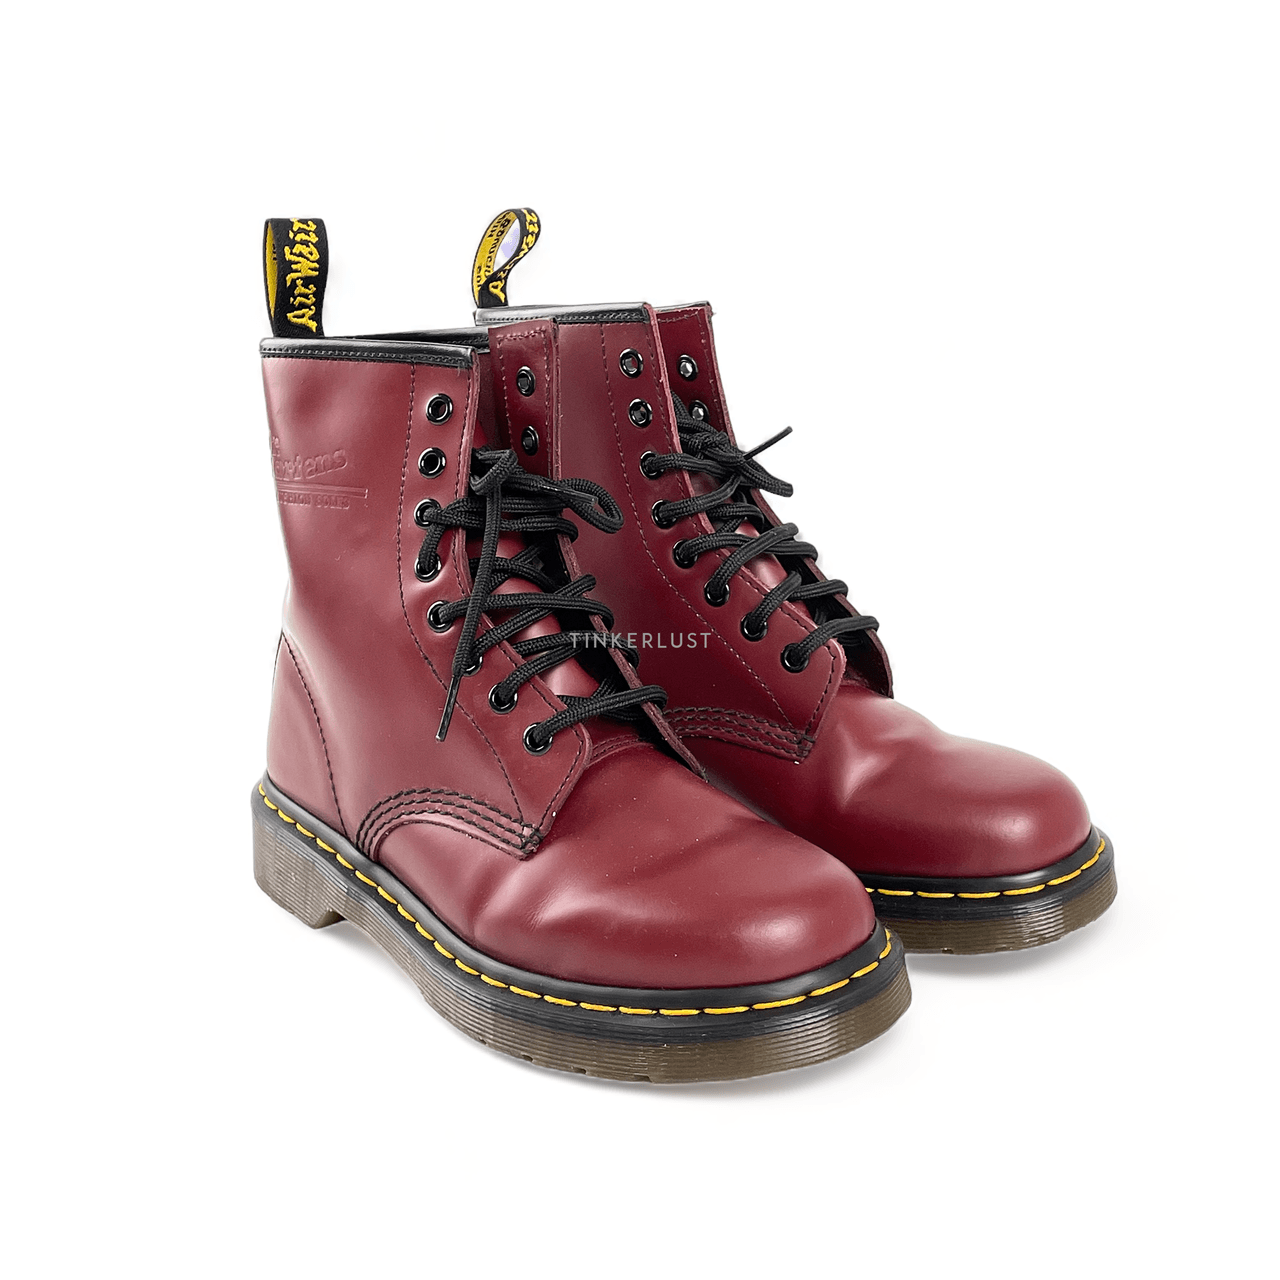 DR MARTENS 1460 8 EYE BOOT - CHERRY RED SMOOTH